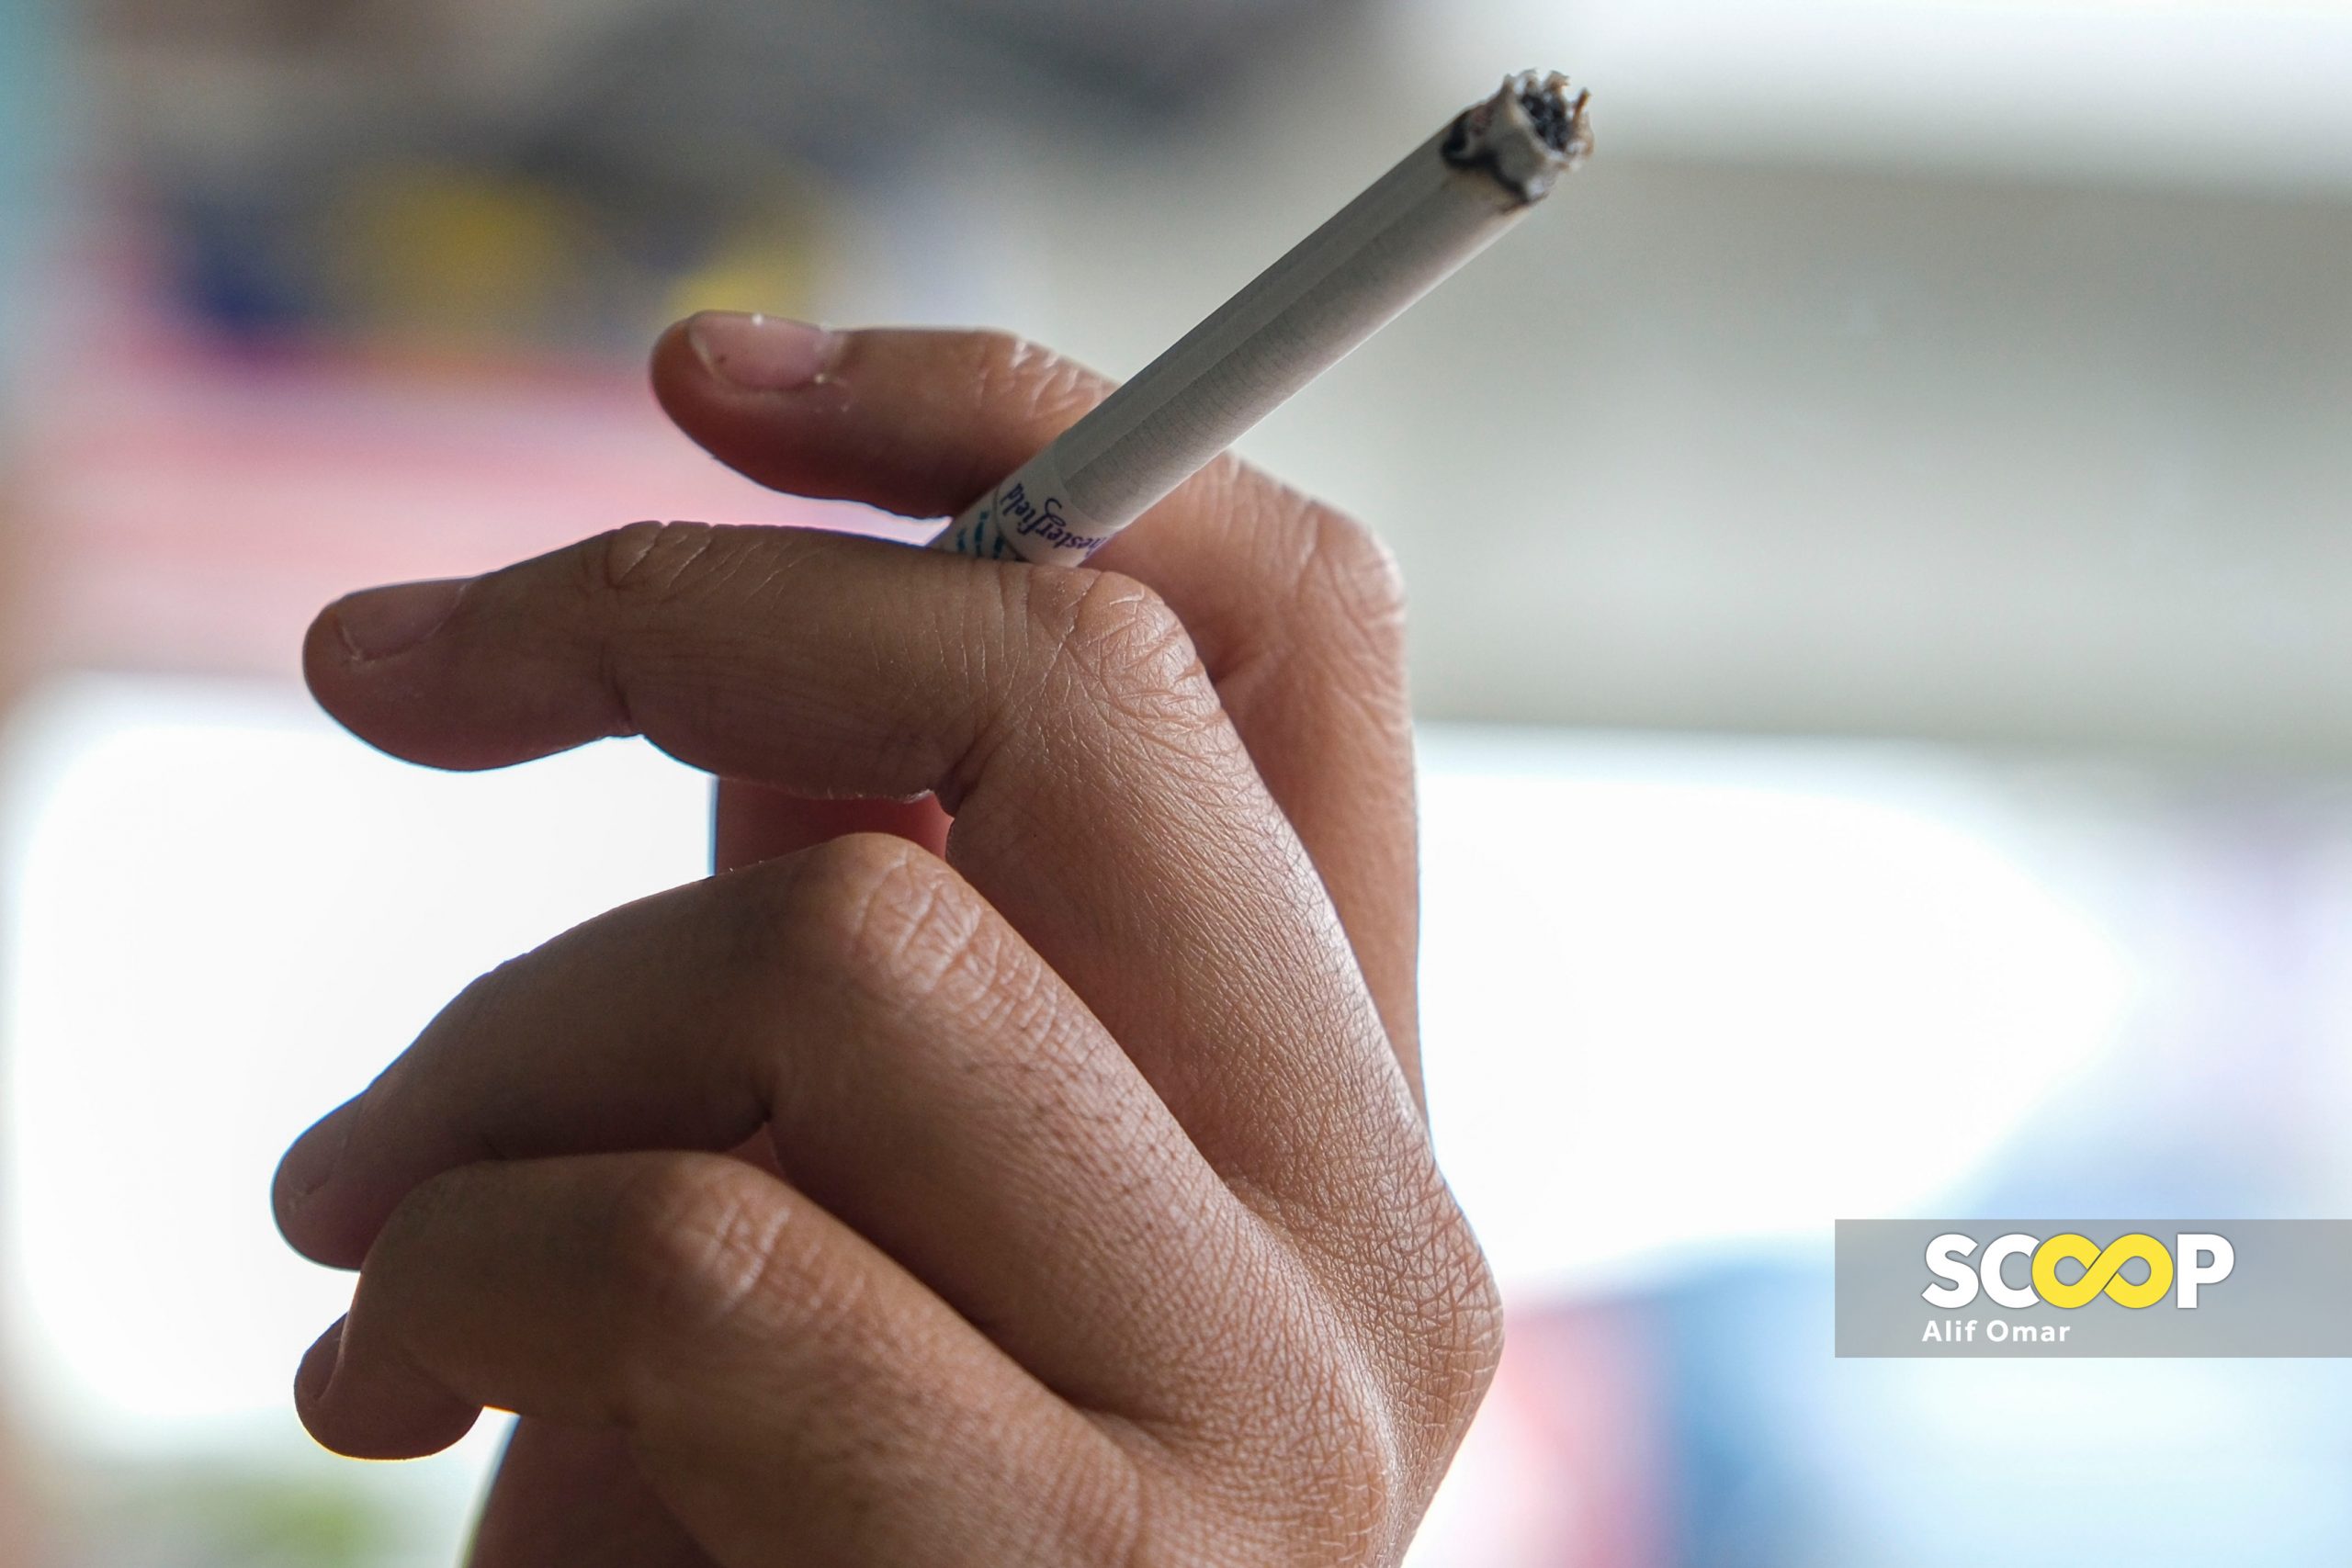 Smoking endgame bill set to include 'educational enforcement' when tabled